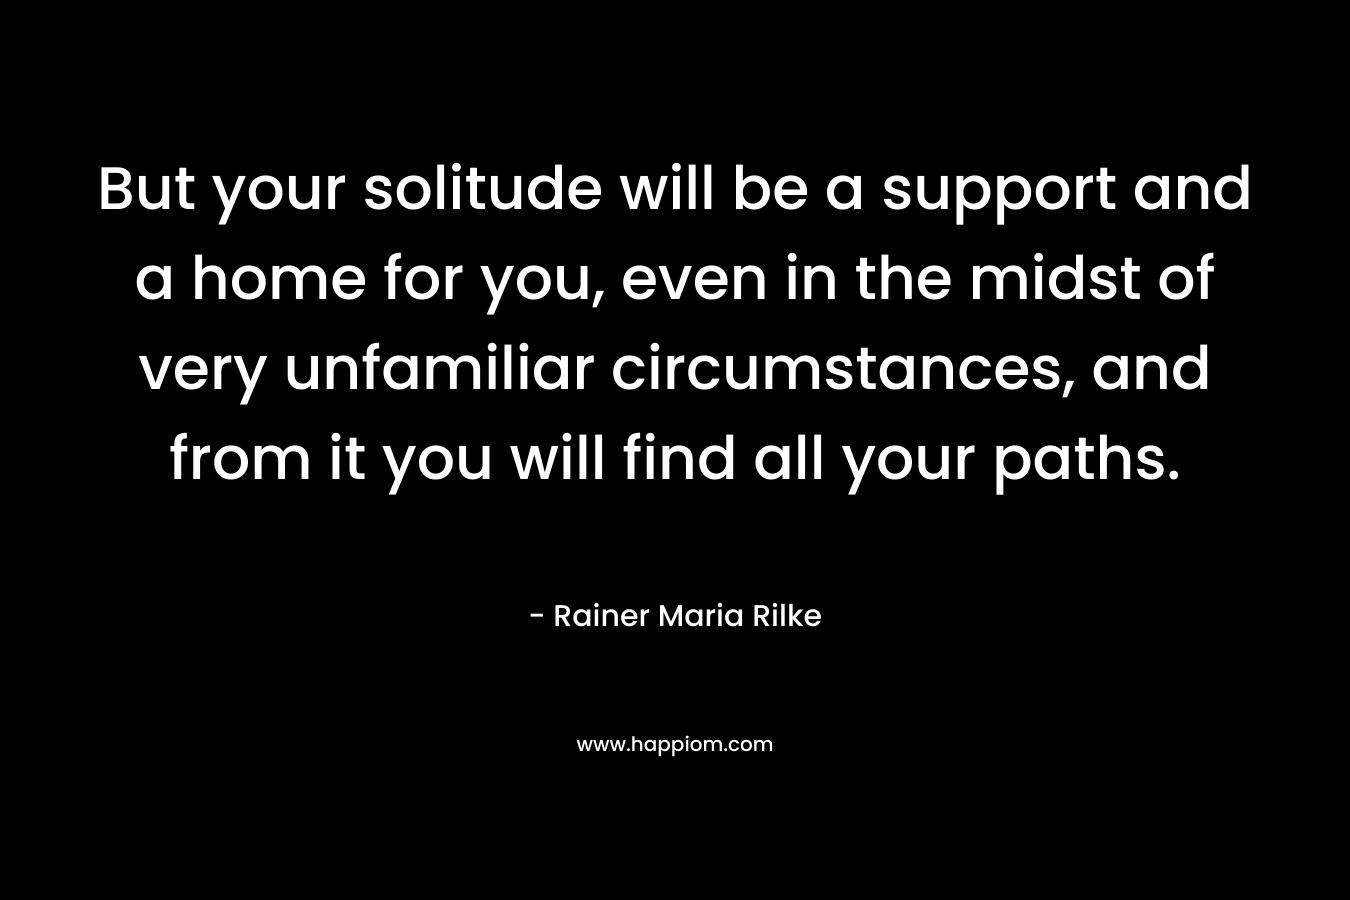 But your solitude will be a support and a home for you, even in the midst of very unfamiliar circumstances, and from it you will find all your paths.